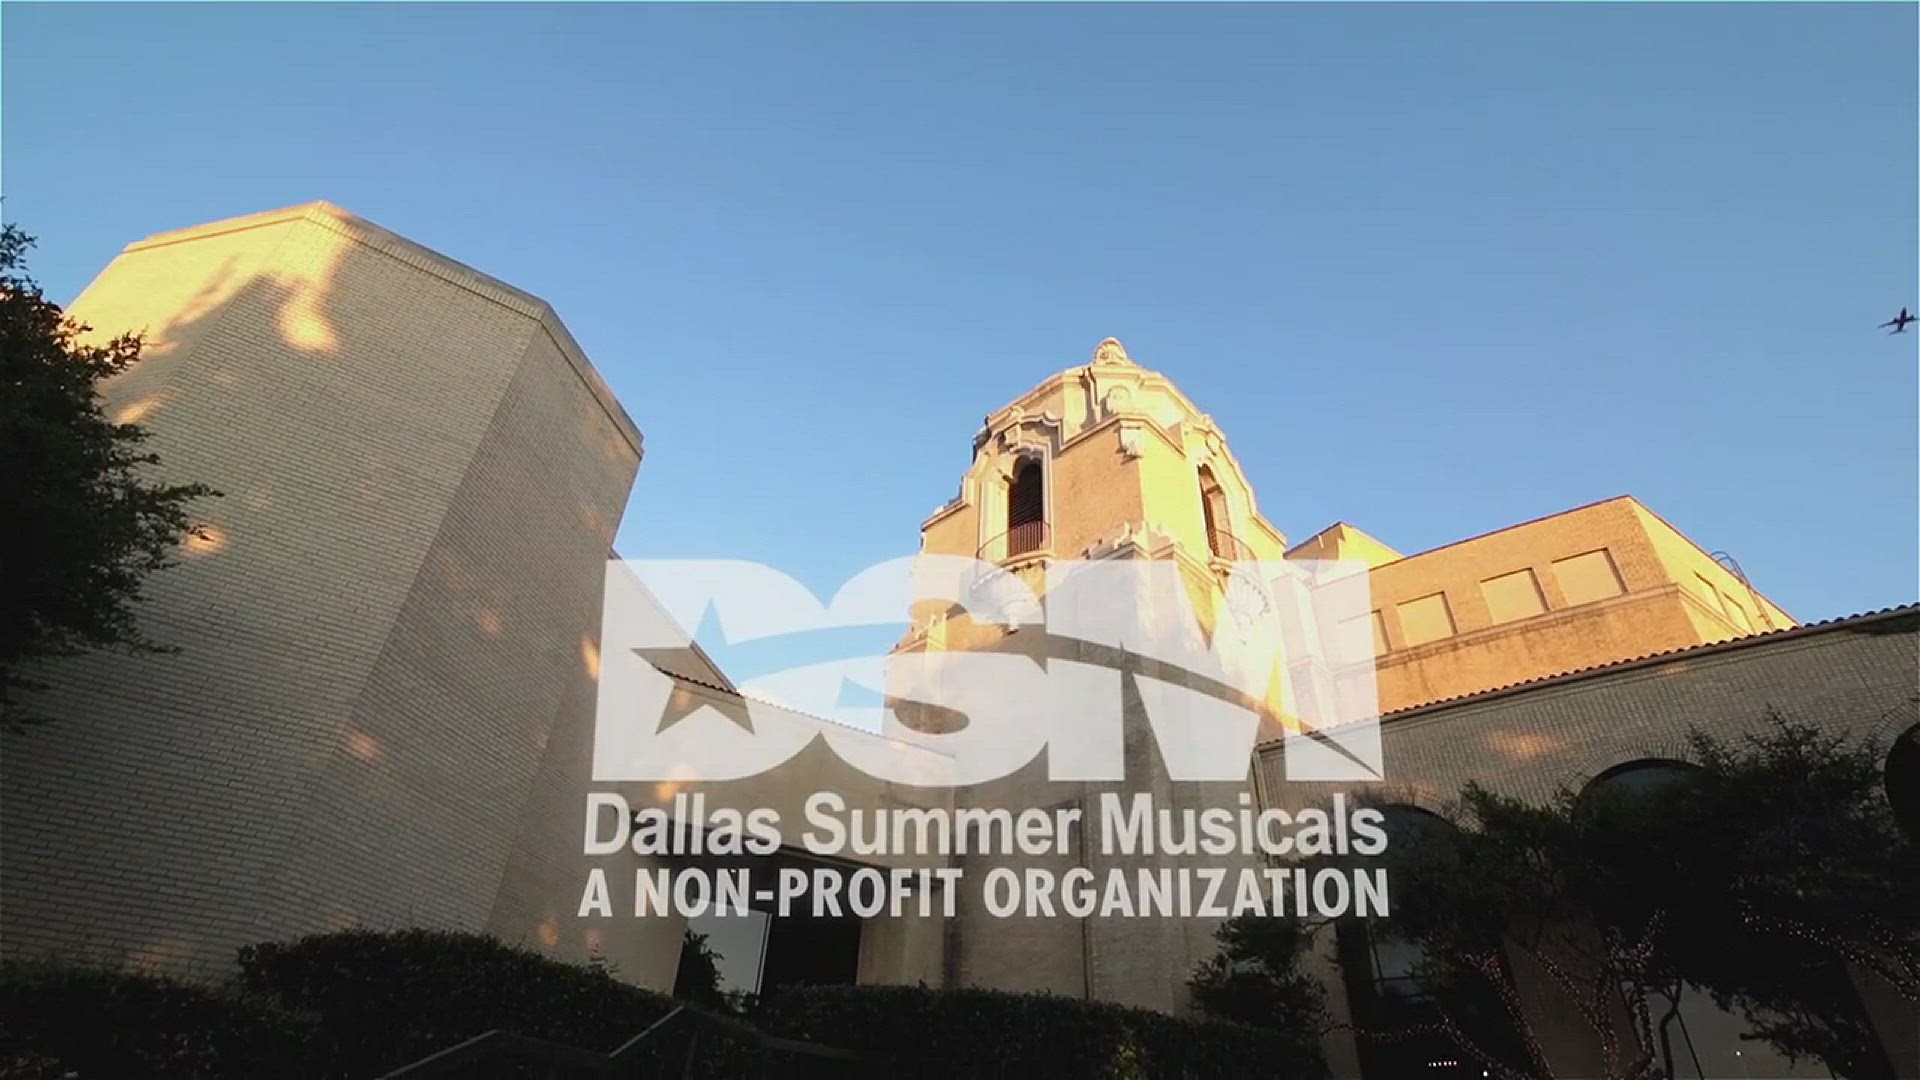 Reactions to Emilio and Gloria Estefan's "On Your Feet" musical at Dallas Summer Musicals. Playing through March 11, 2018 at Fair Park Music Hall.